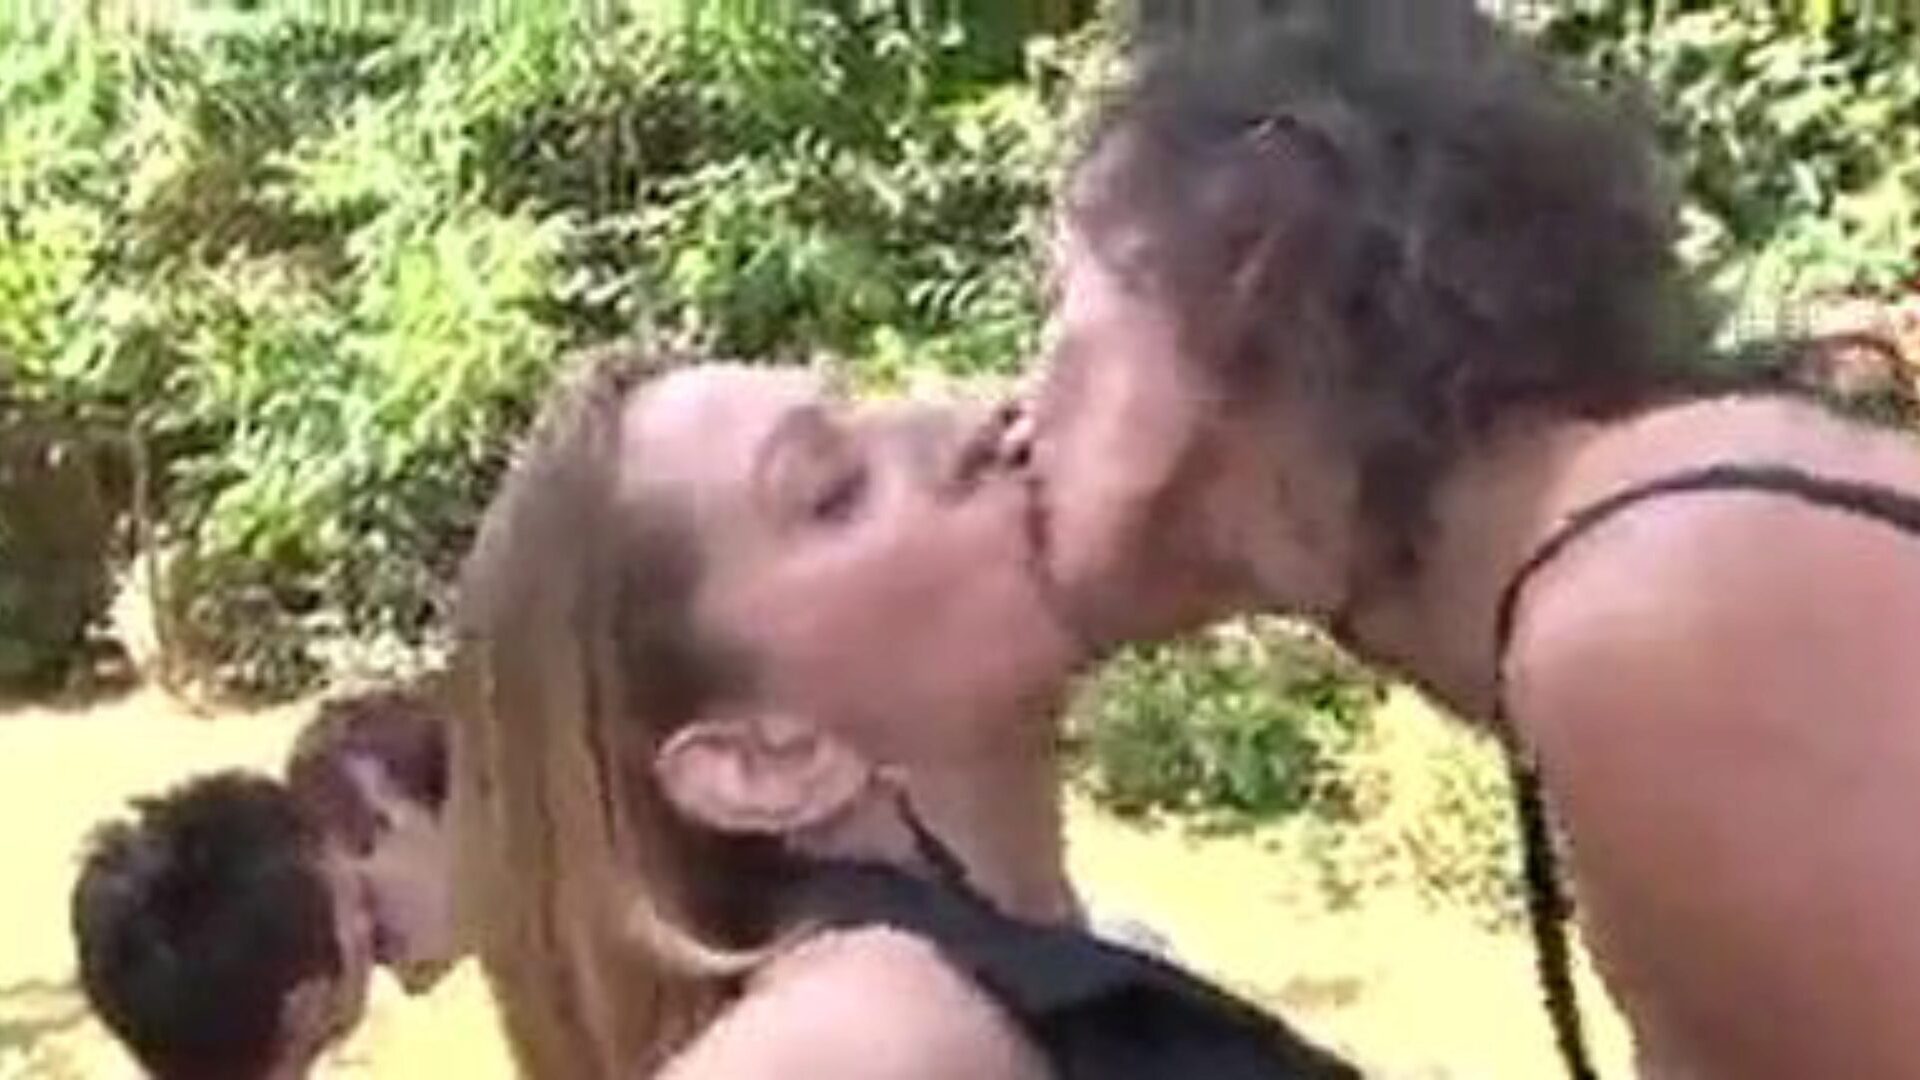 French Cougars: Free Mobile French Porn Video b6 - xHamster Watch French Cougars tube lovemaking clip for free on xHamster, with the superior bevy of Xxx French Mobile French & French Xxx porn video vignettes